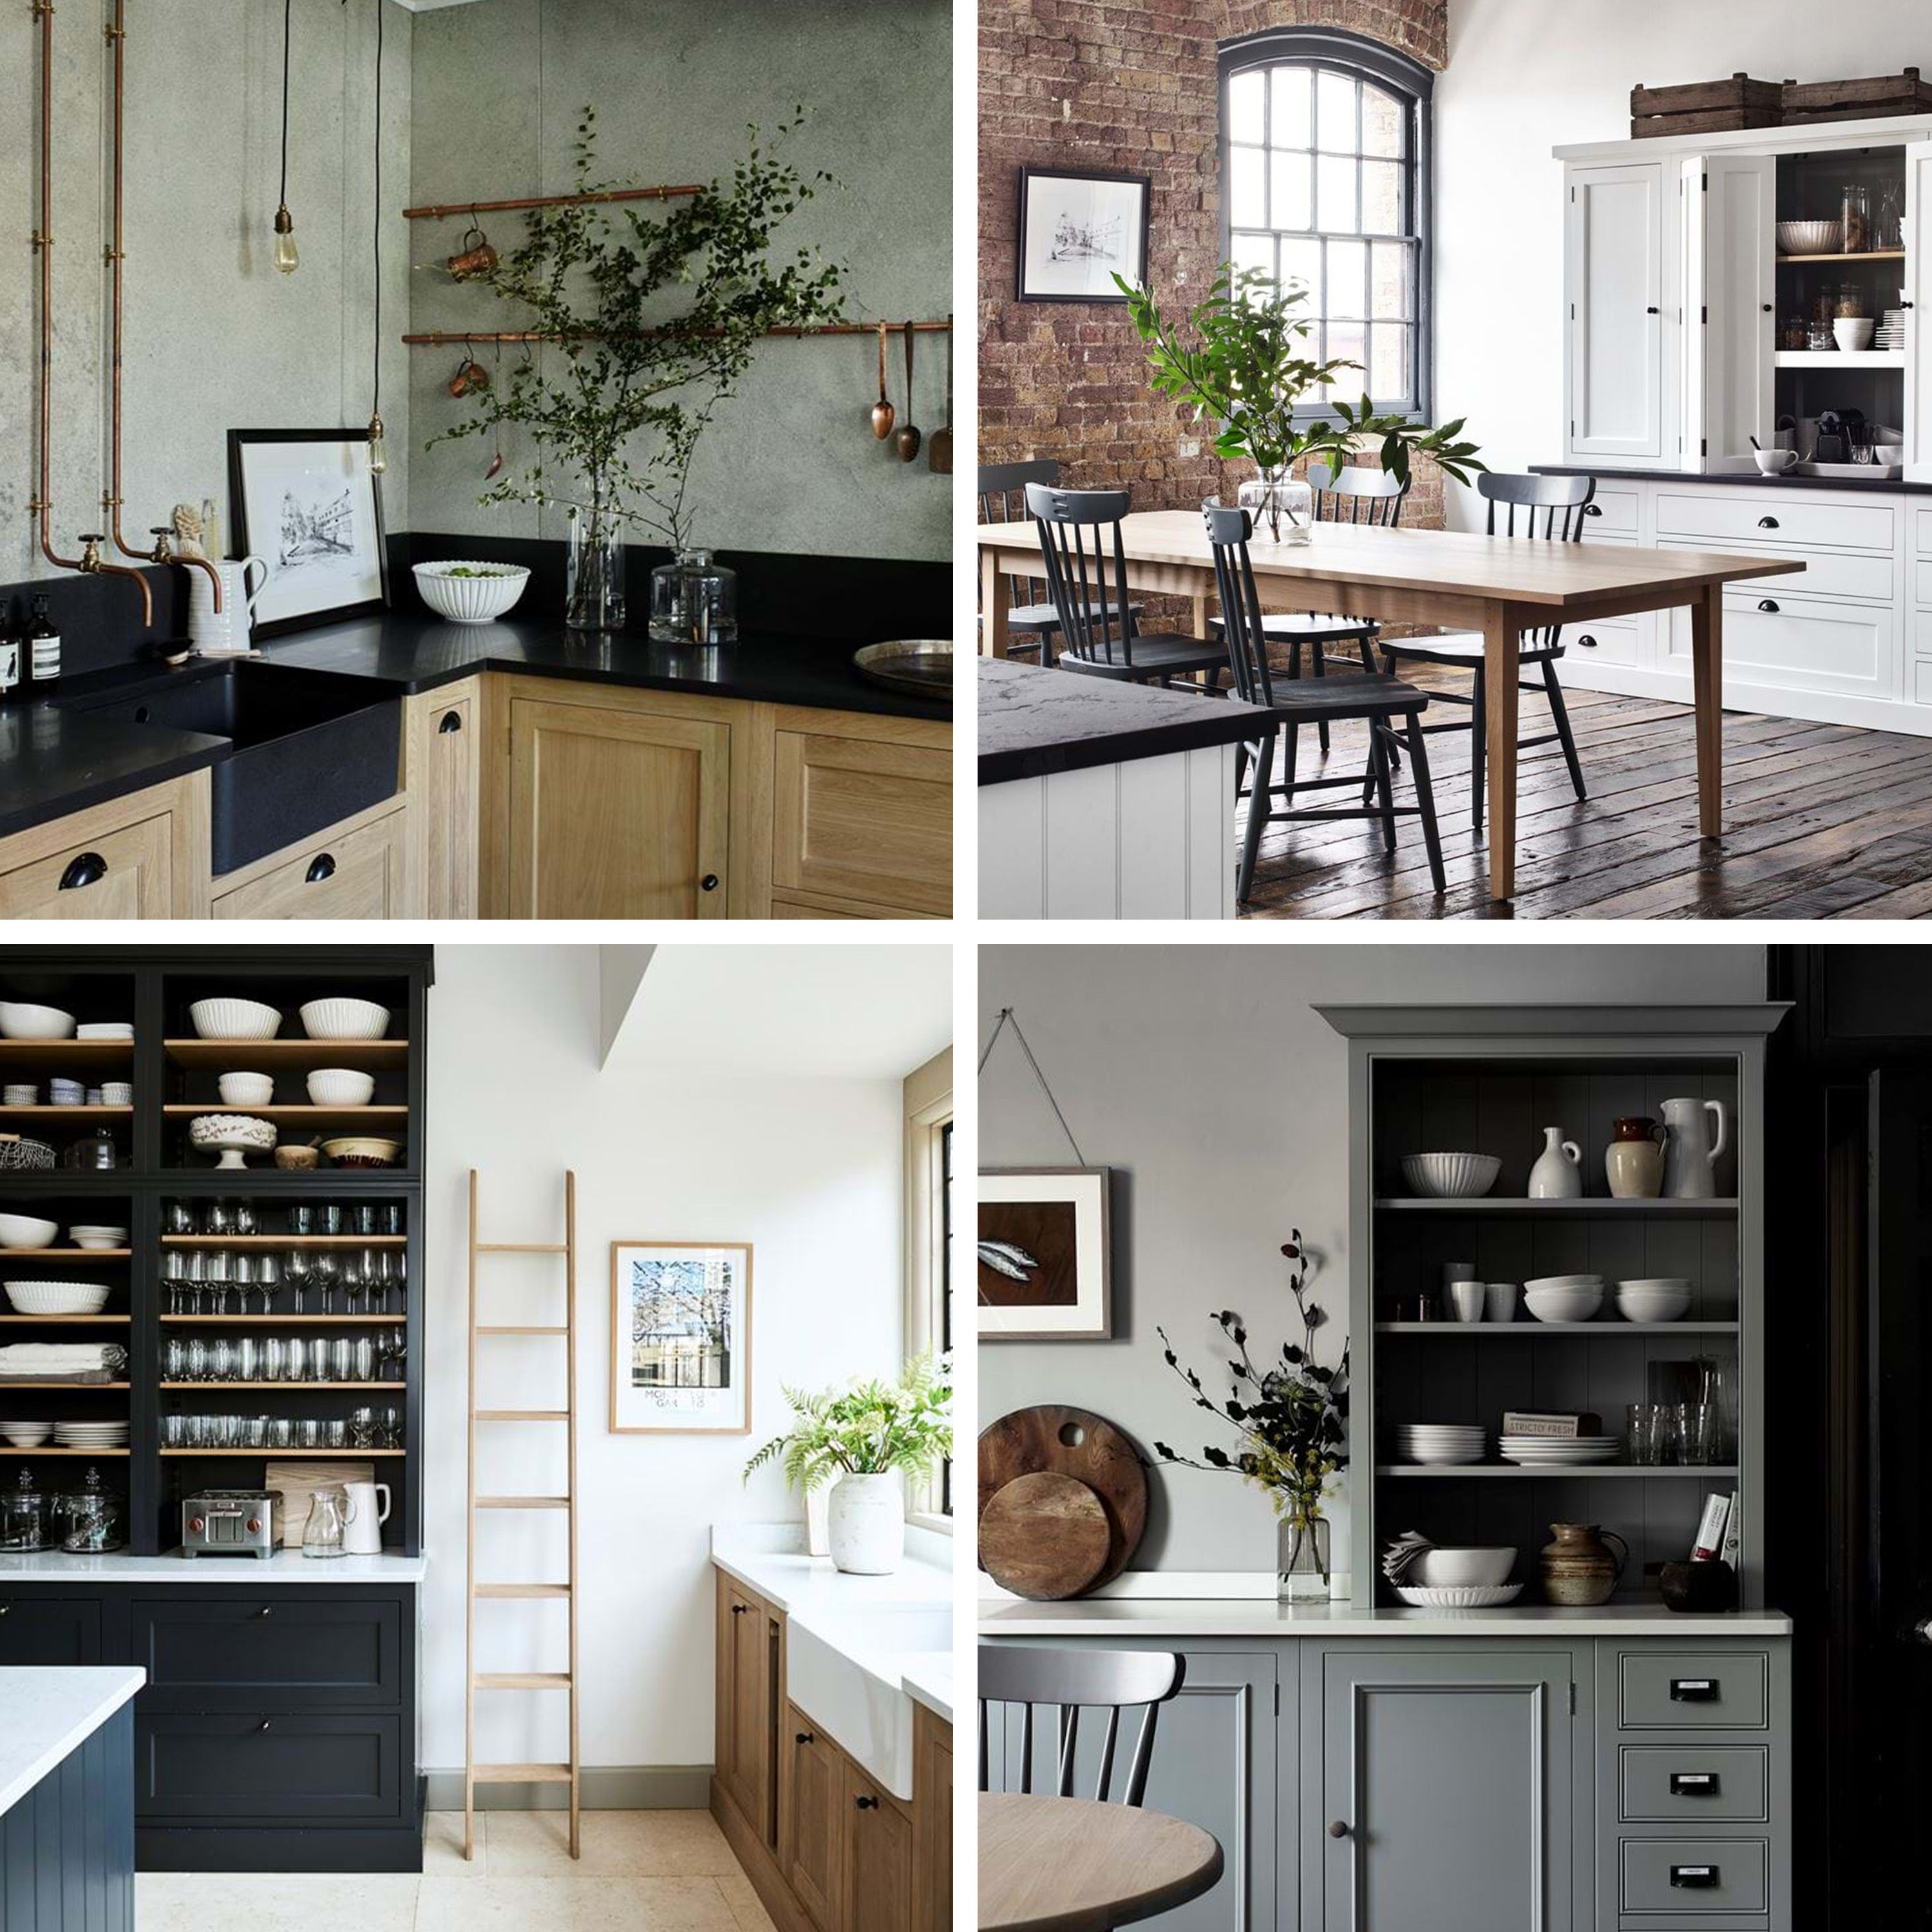 20 Country Kitchen Ideas To Fall In Love With